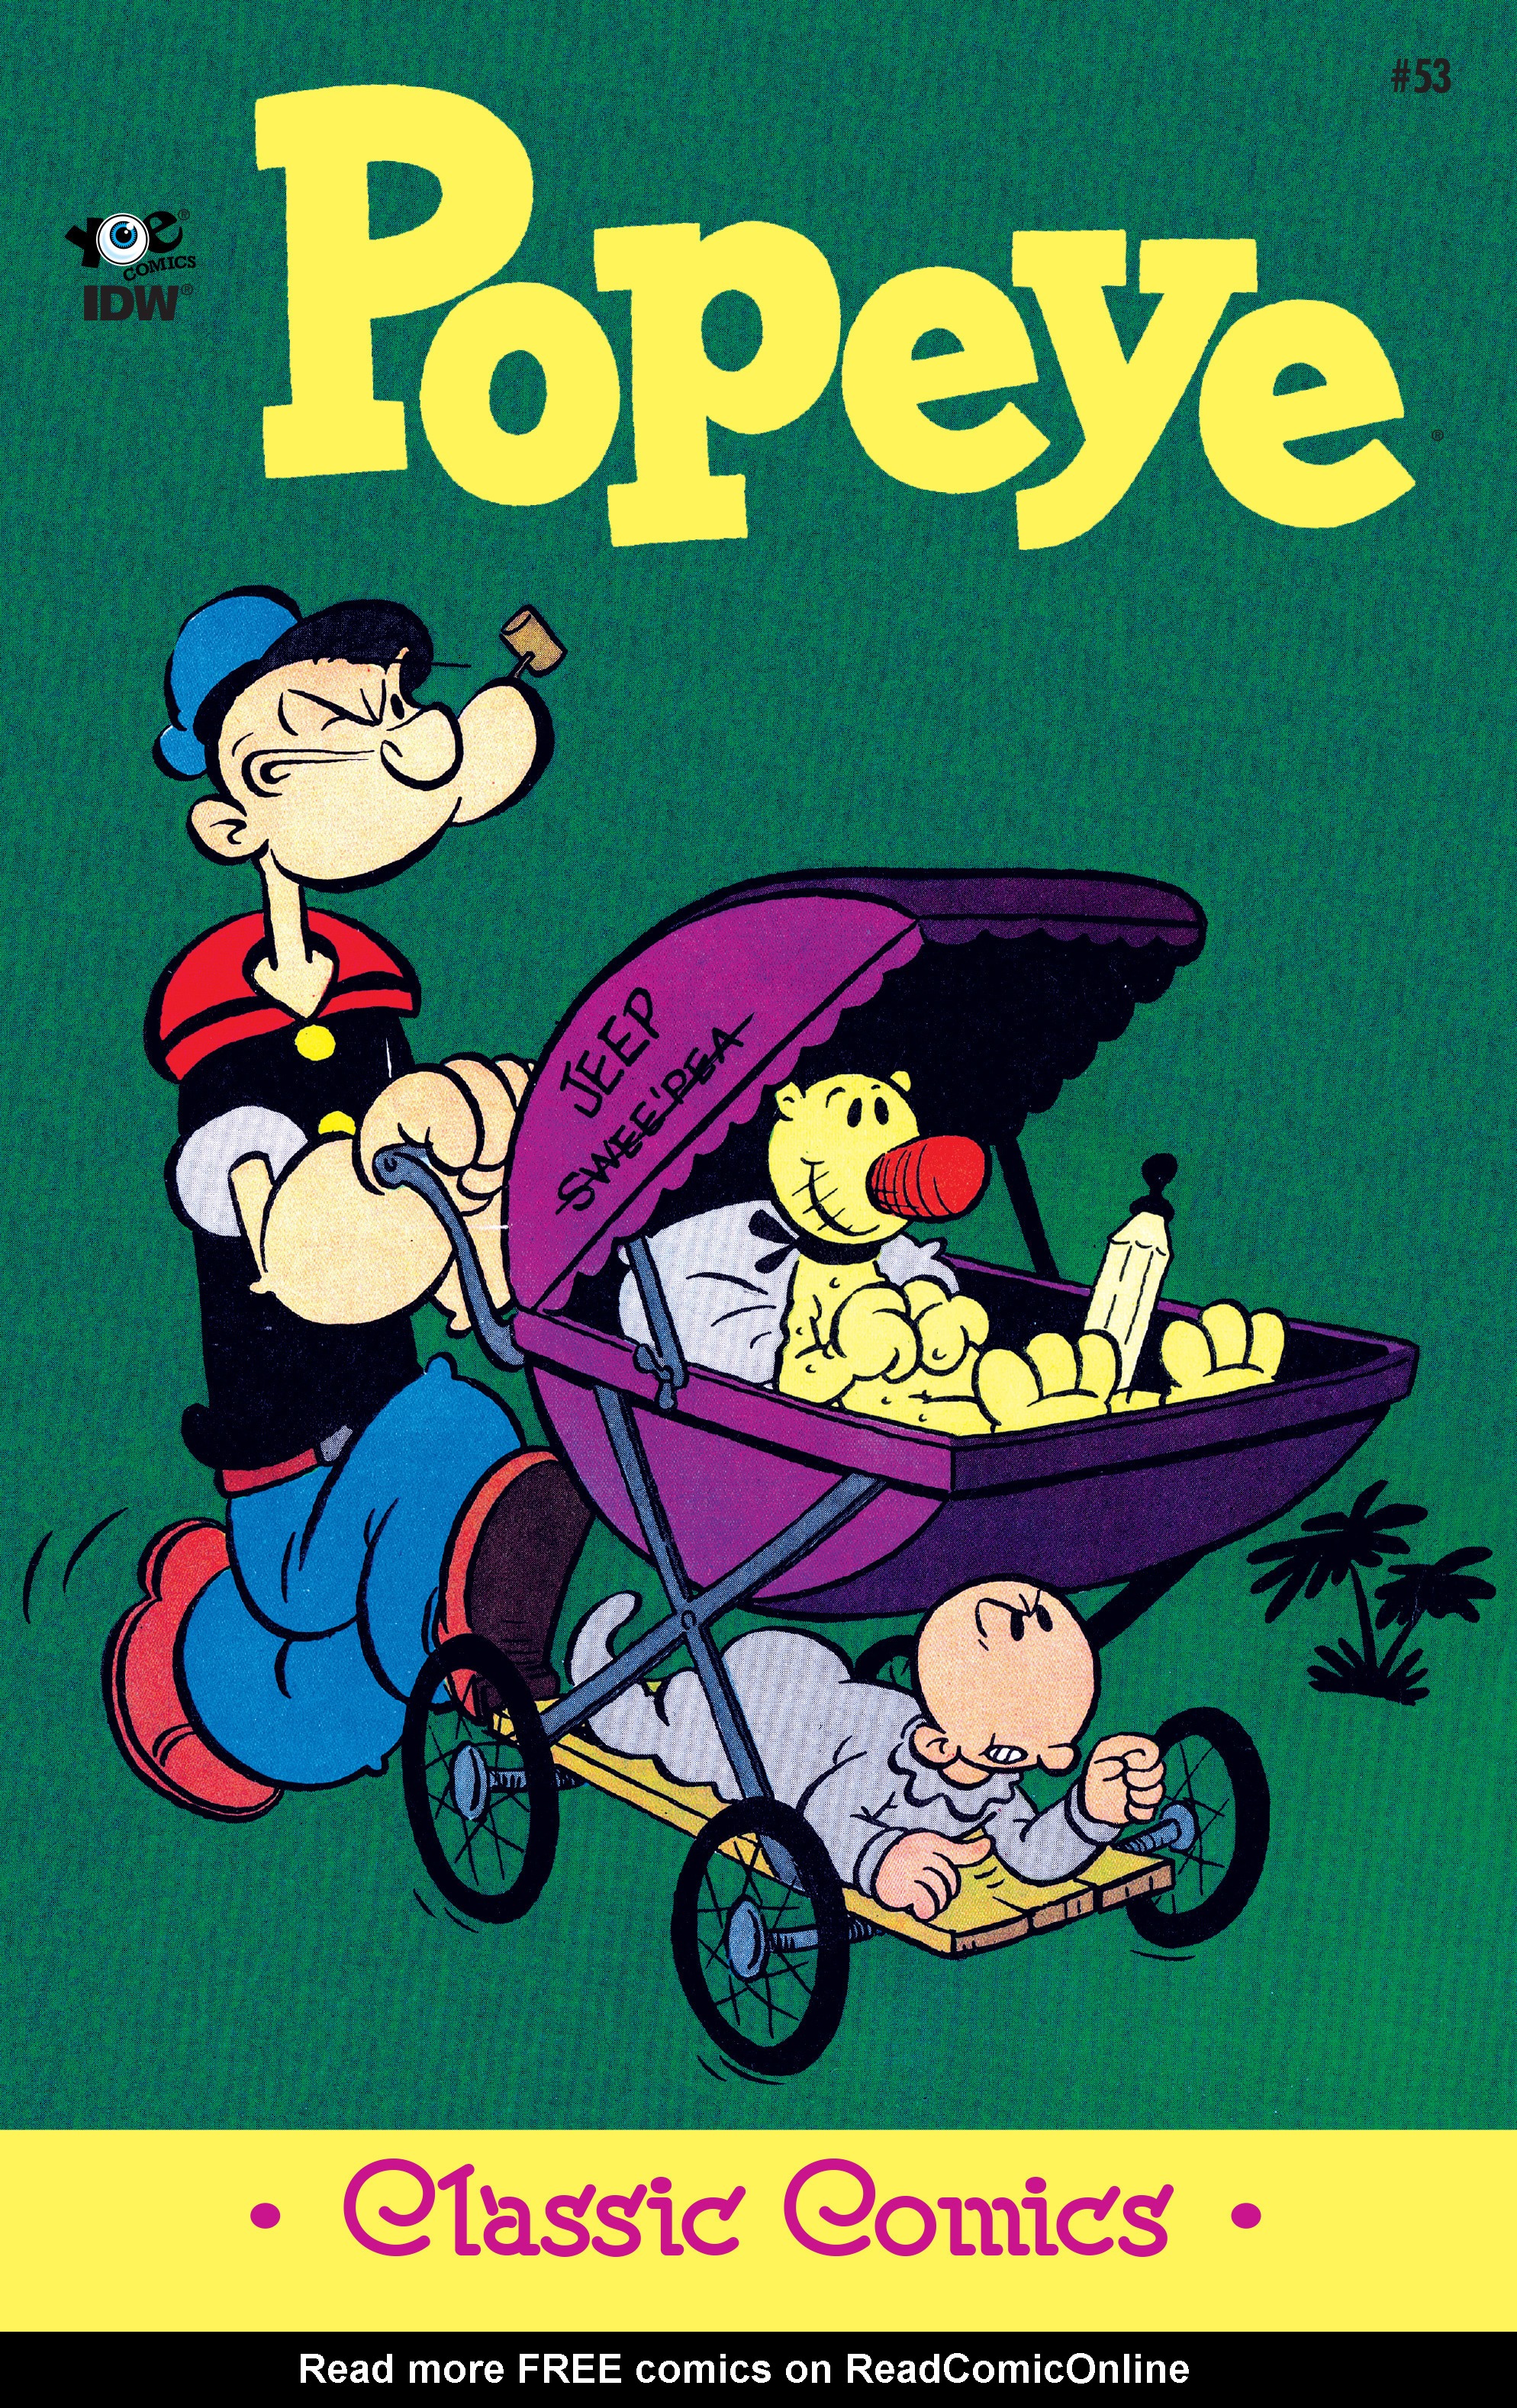 Read online Classic Popeye comic -  Issue #53 - 1